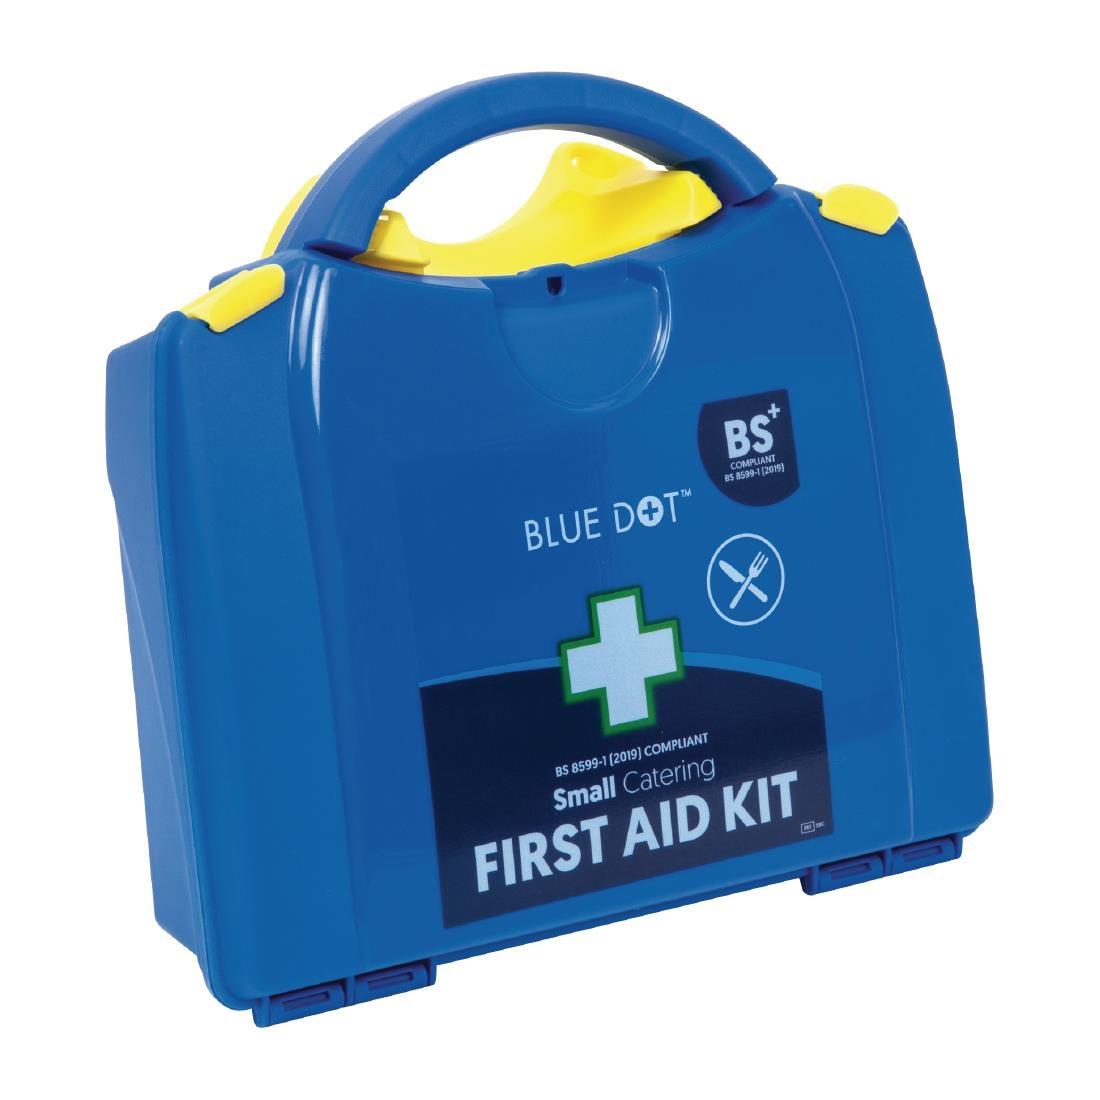 Small Catering First Aid Kit BS 8599-1:2019 - FB416  - 2